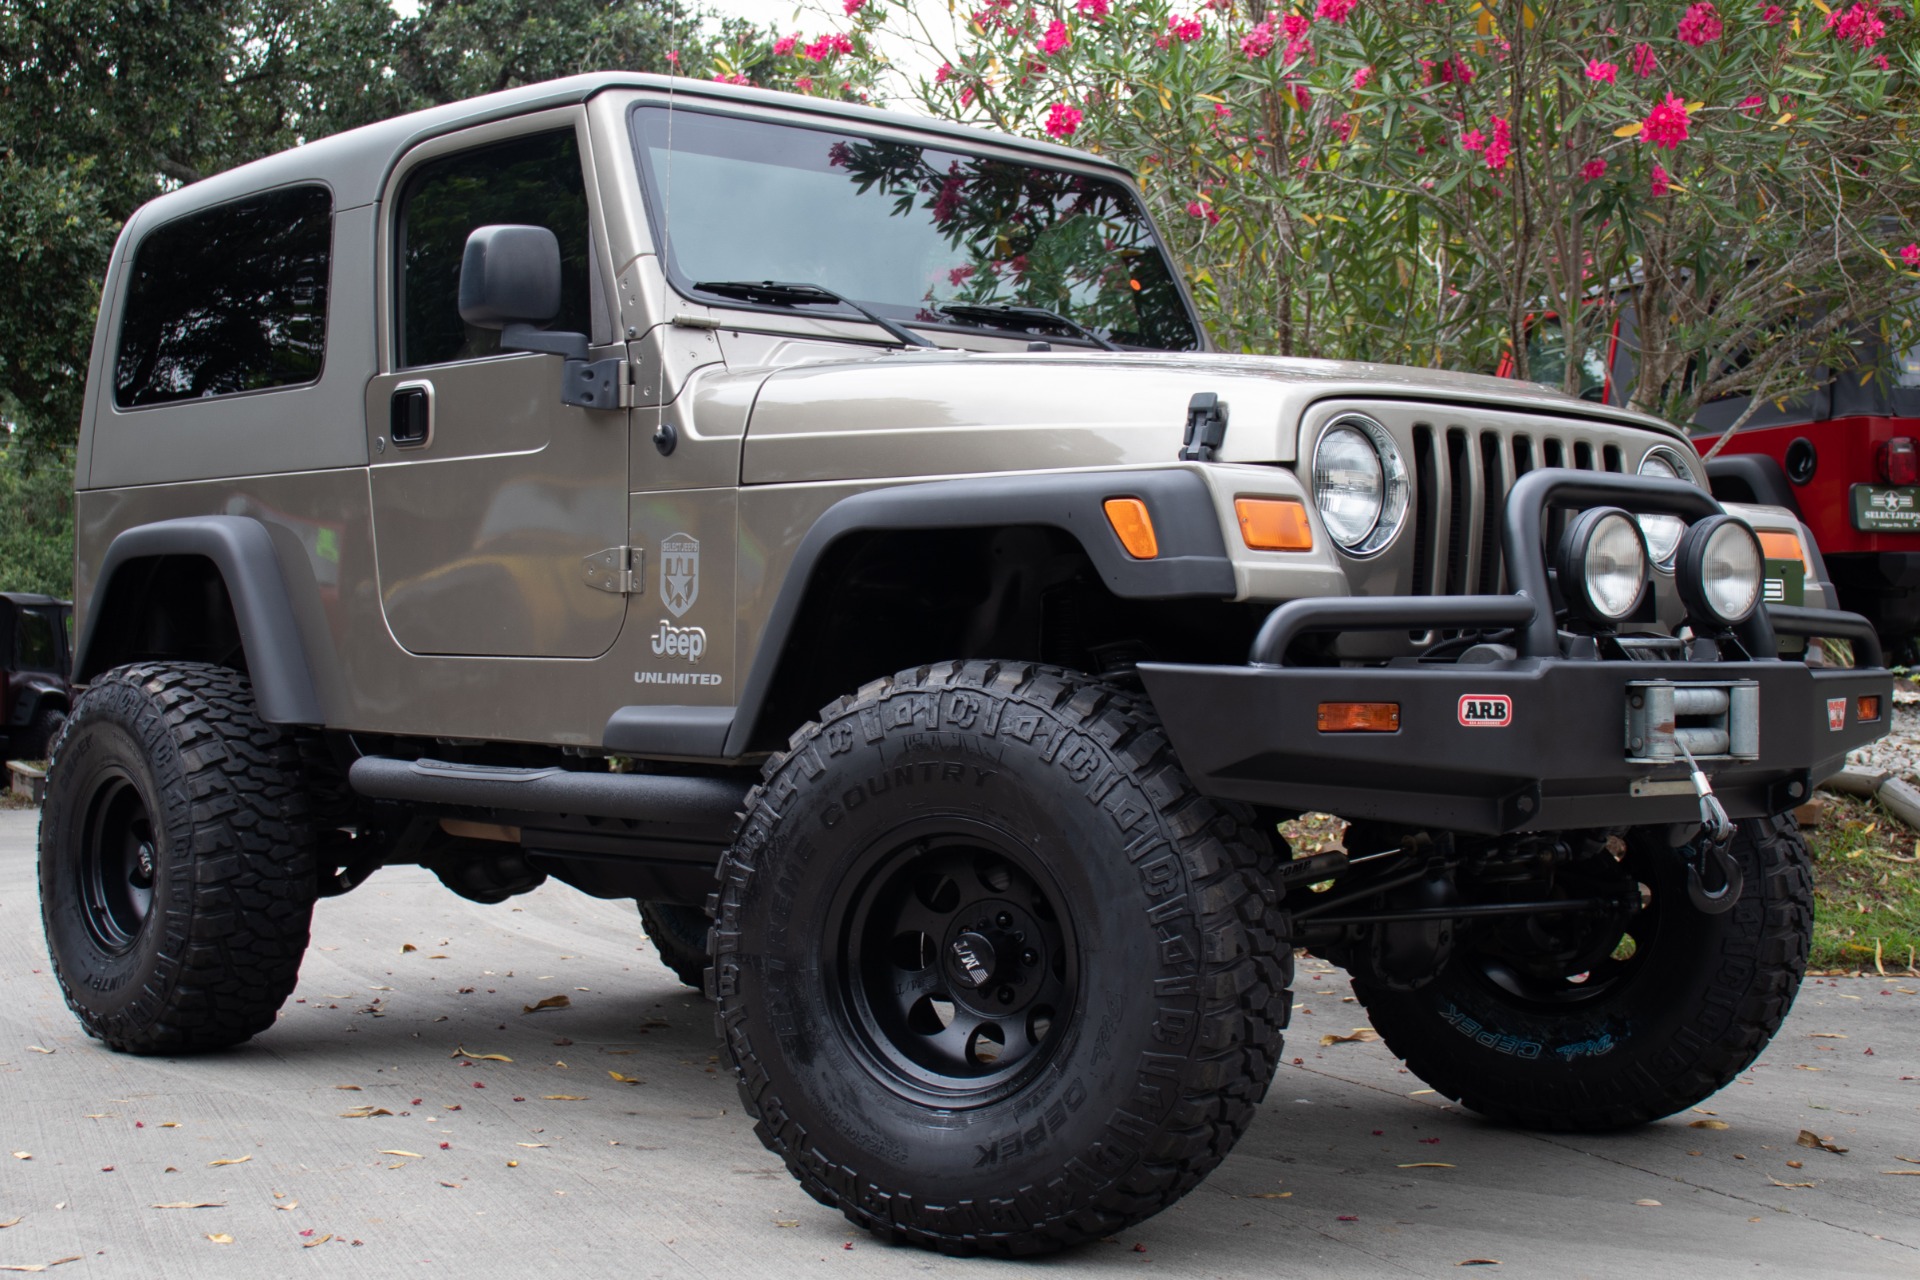 Used 2005 Jeep Wrangler Unlimited For Sale ($25,995) | Select Jeeps Inc.  Stock #304326